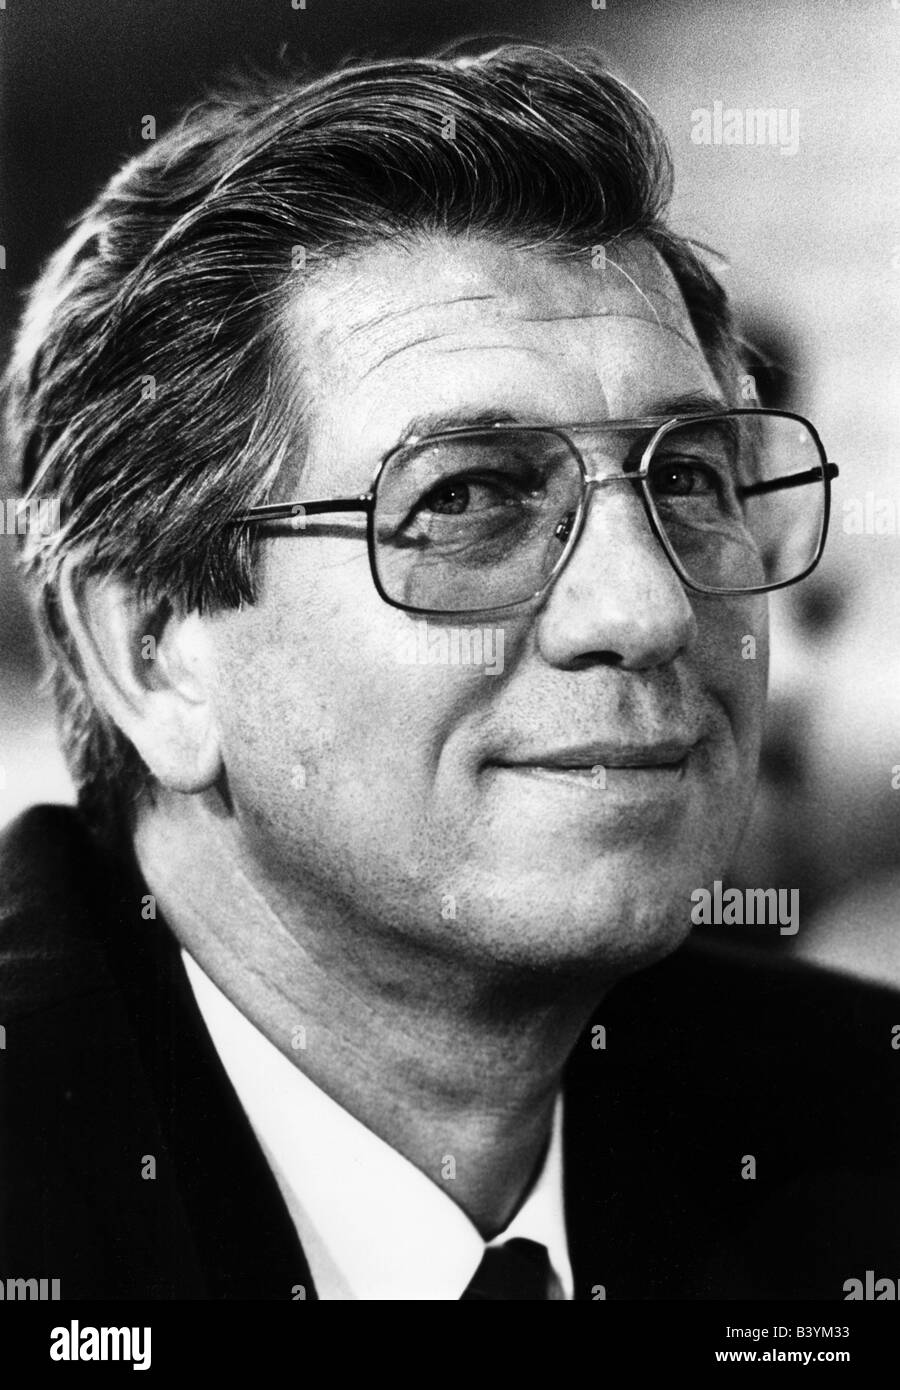 Schoefberger, Rudolf , * 29.7.1935, German politician, chairman of the Social Democratic Party in Bavaria 1985 - 1991, portrait, 1985, , Stock Photo